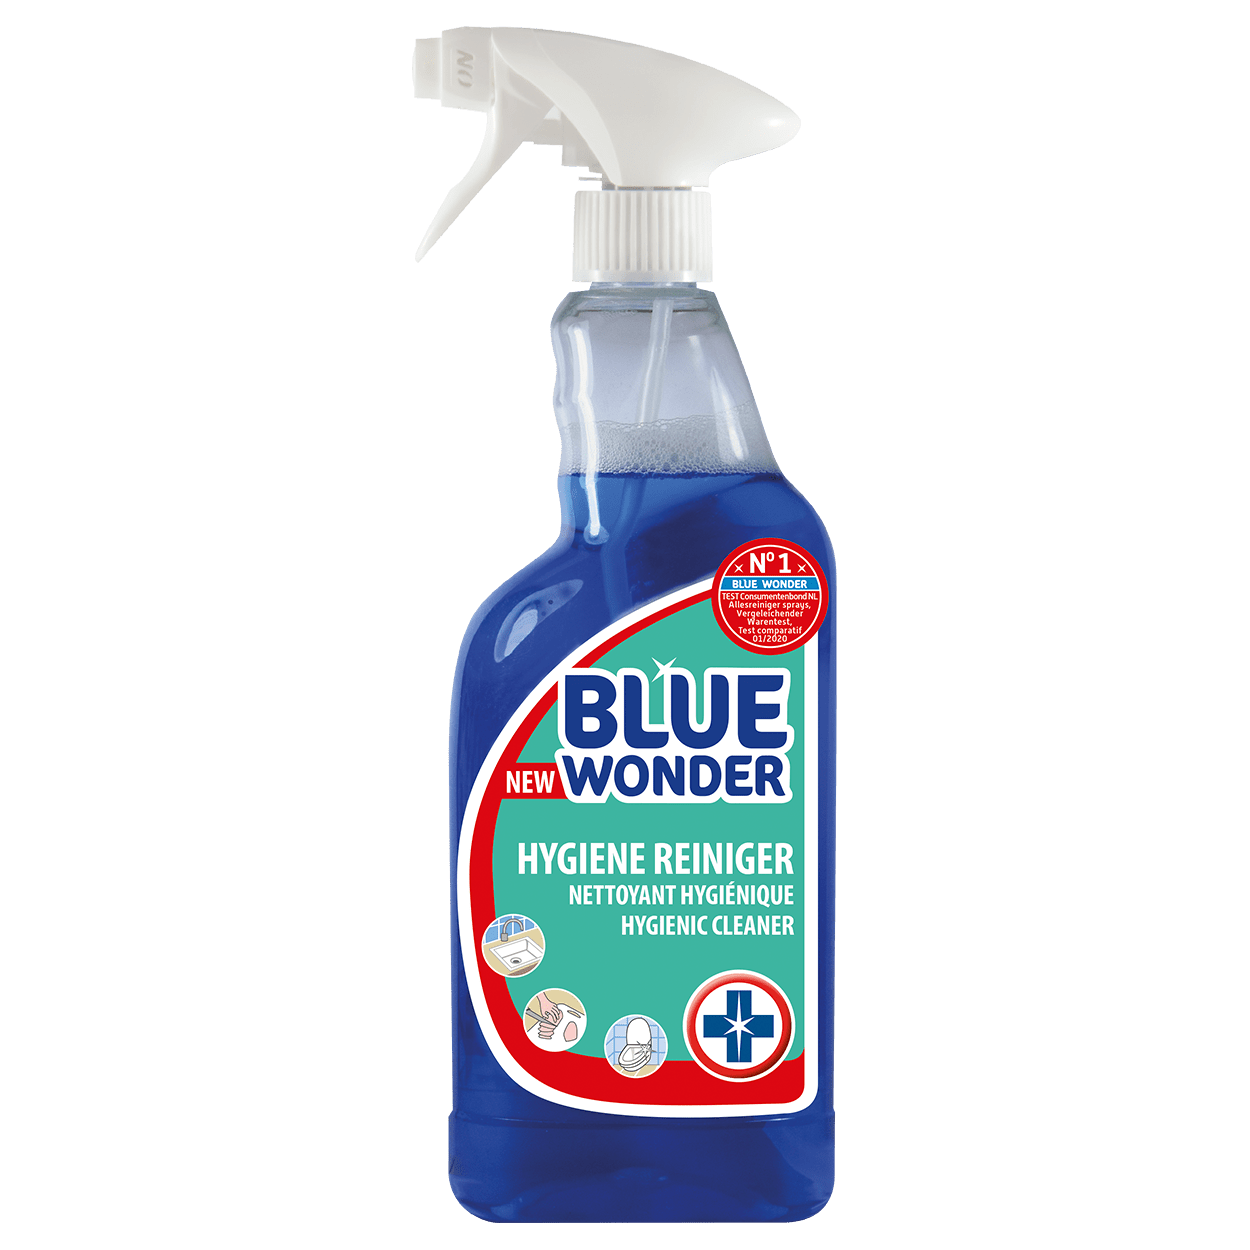 Removes grease, dirt and all kinds of stains (even from clothing). Can be used to clean doors, kitchen, bathroom, countertop, extractor hood, cupboards, windows, mirrors, car rims, wood and garden furniture, to name a few. Ready for use. Ideal for quick, daily cleaning jobs.